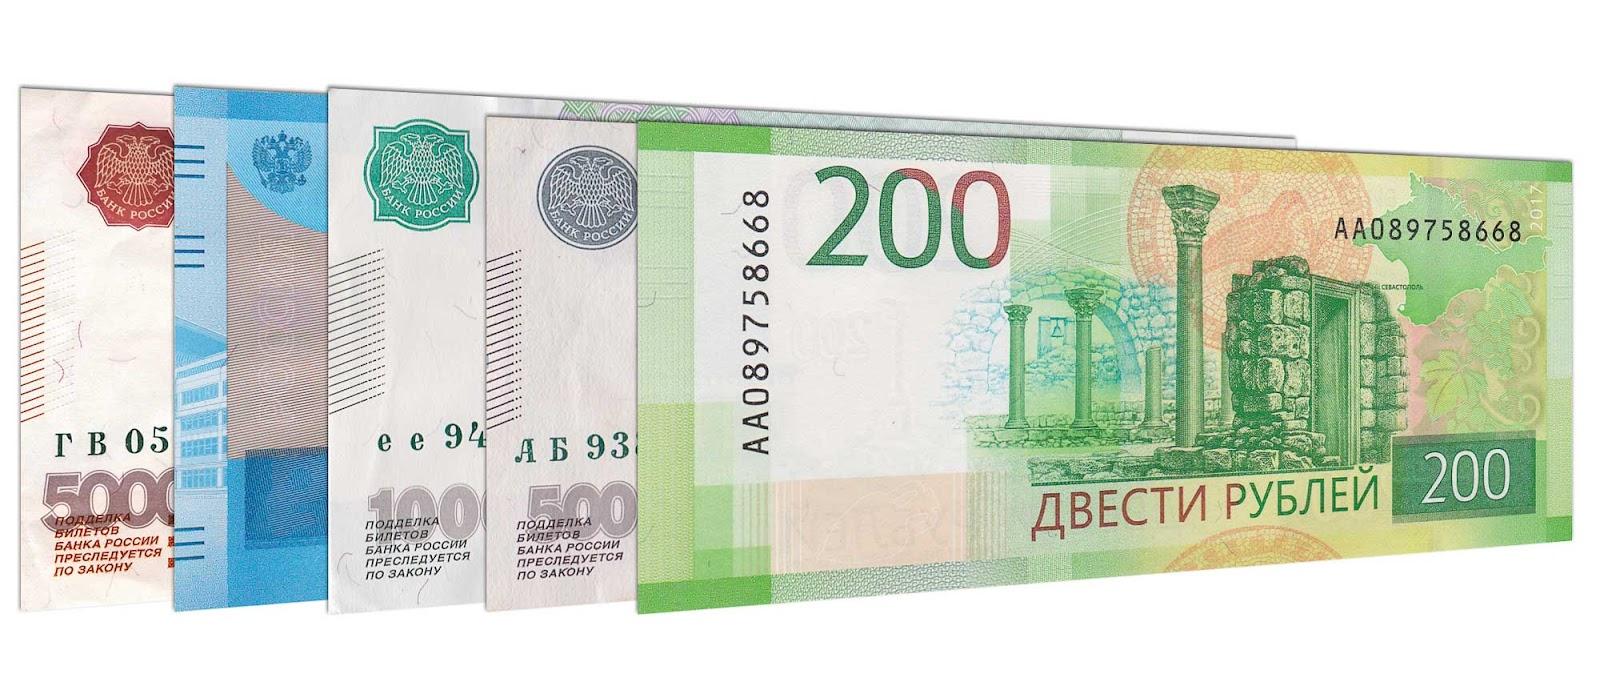 Russian Ruble banknotes